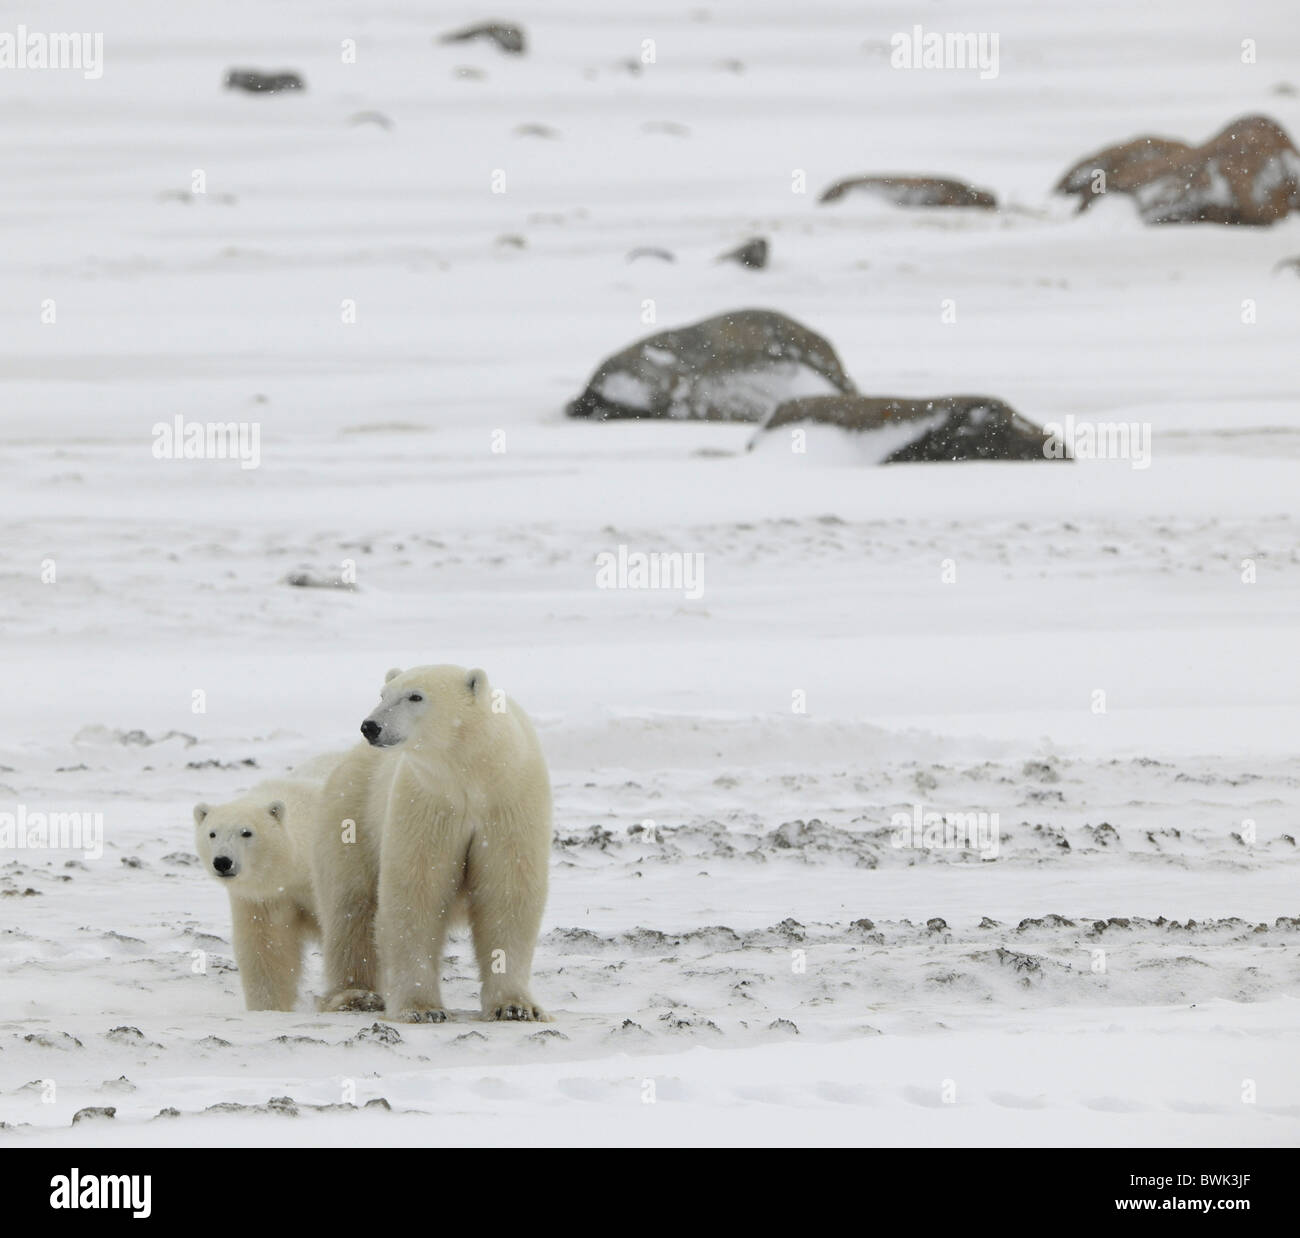 Two polar bears. 2 .Two polar bears in snow-covered tundra stand nearby. It is snowing. Stock Photo